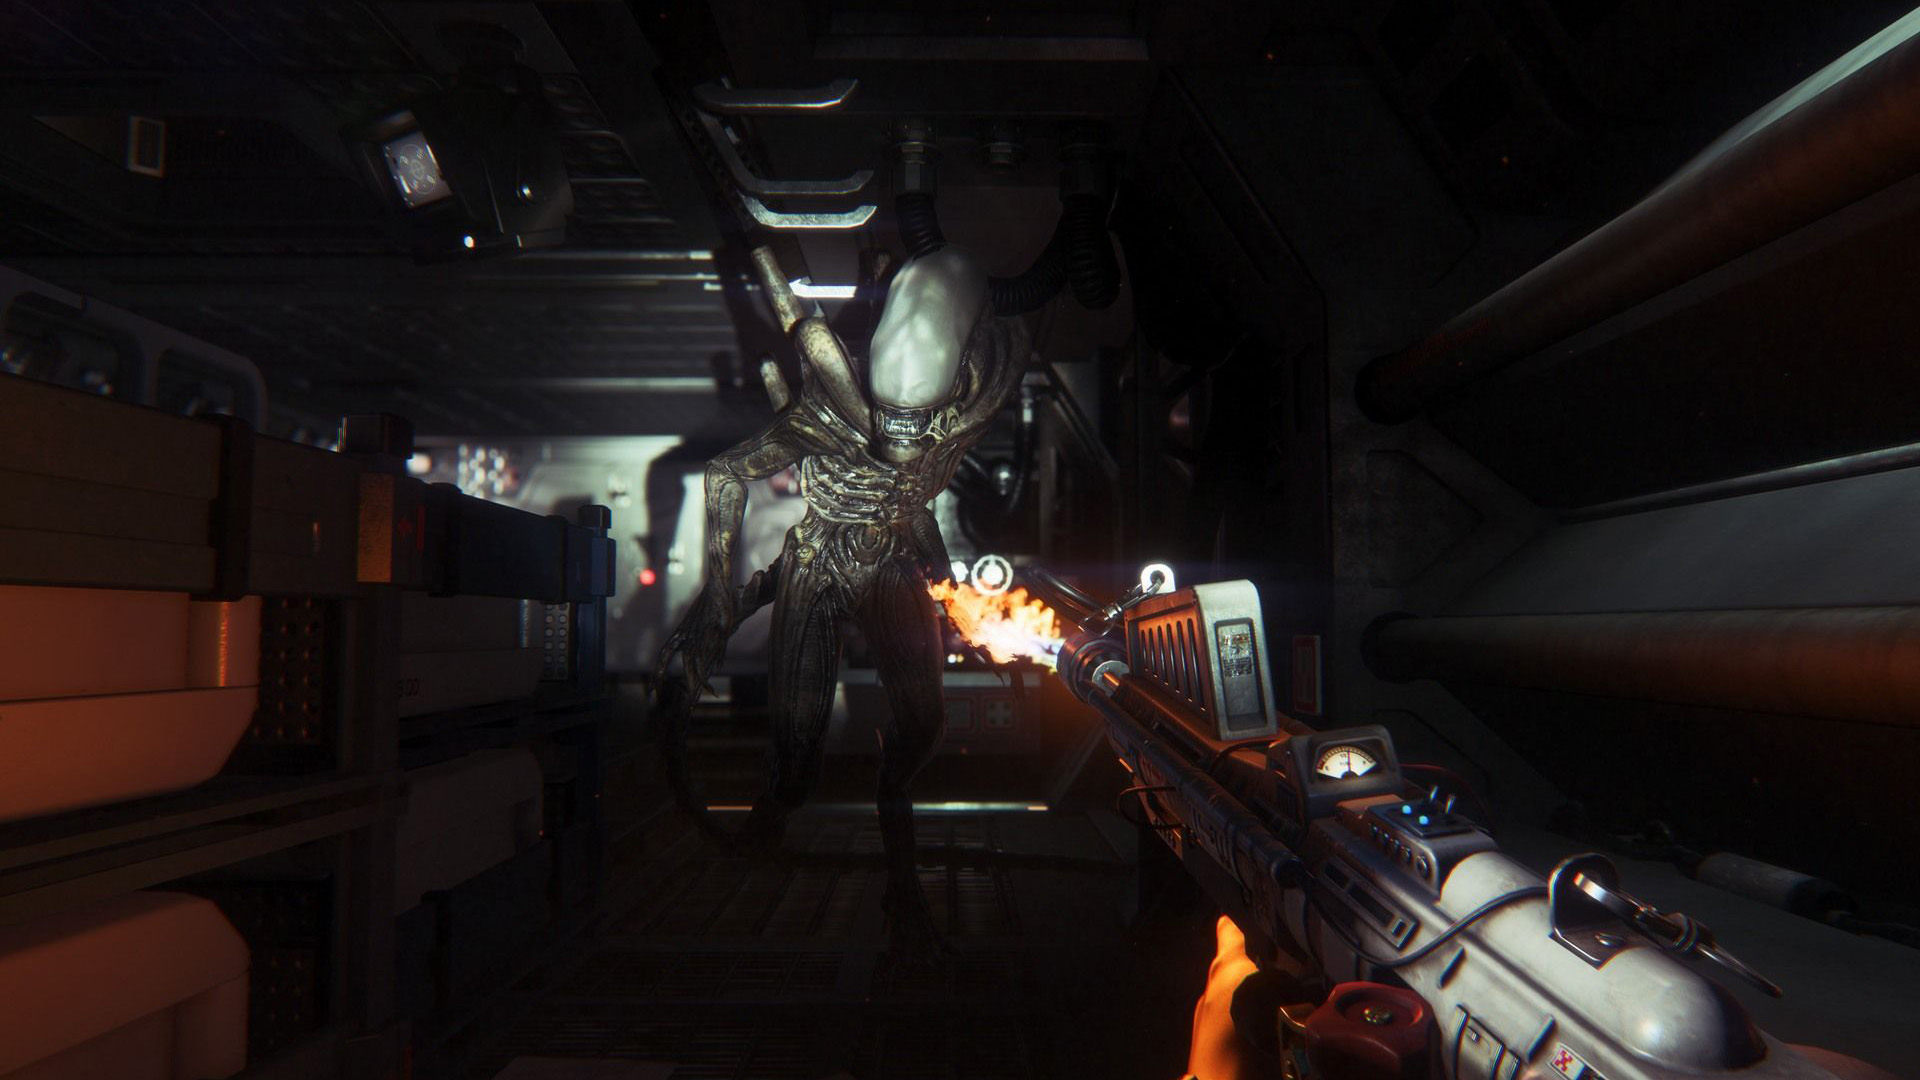 Скриншот *Alien: Isolation - Collection [PS4] 5.05 / 6.72 / 7.02 [EUR] (2014) [Русский] (v1.04)*